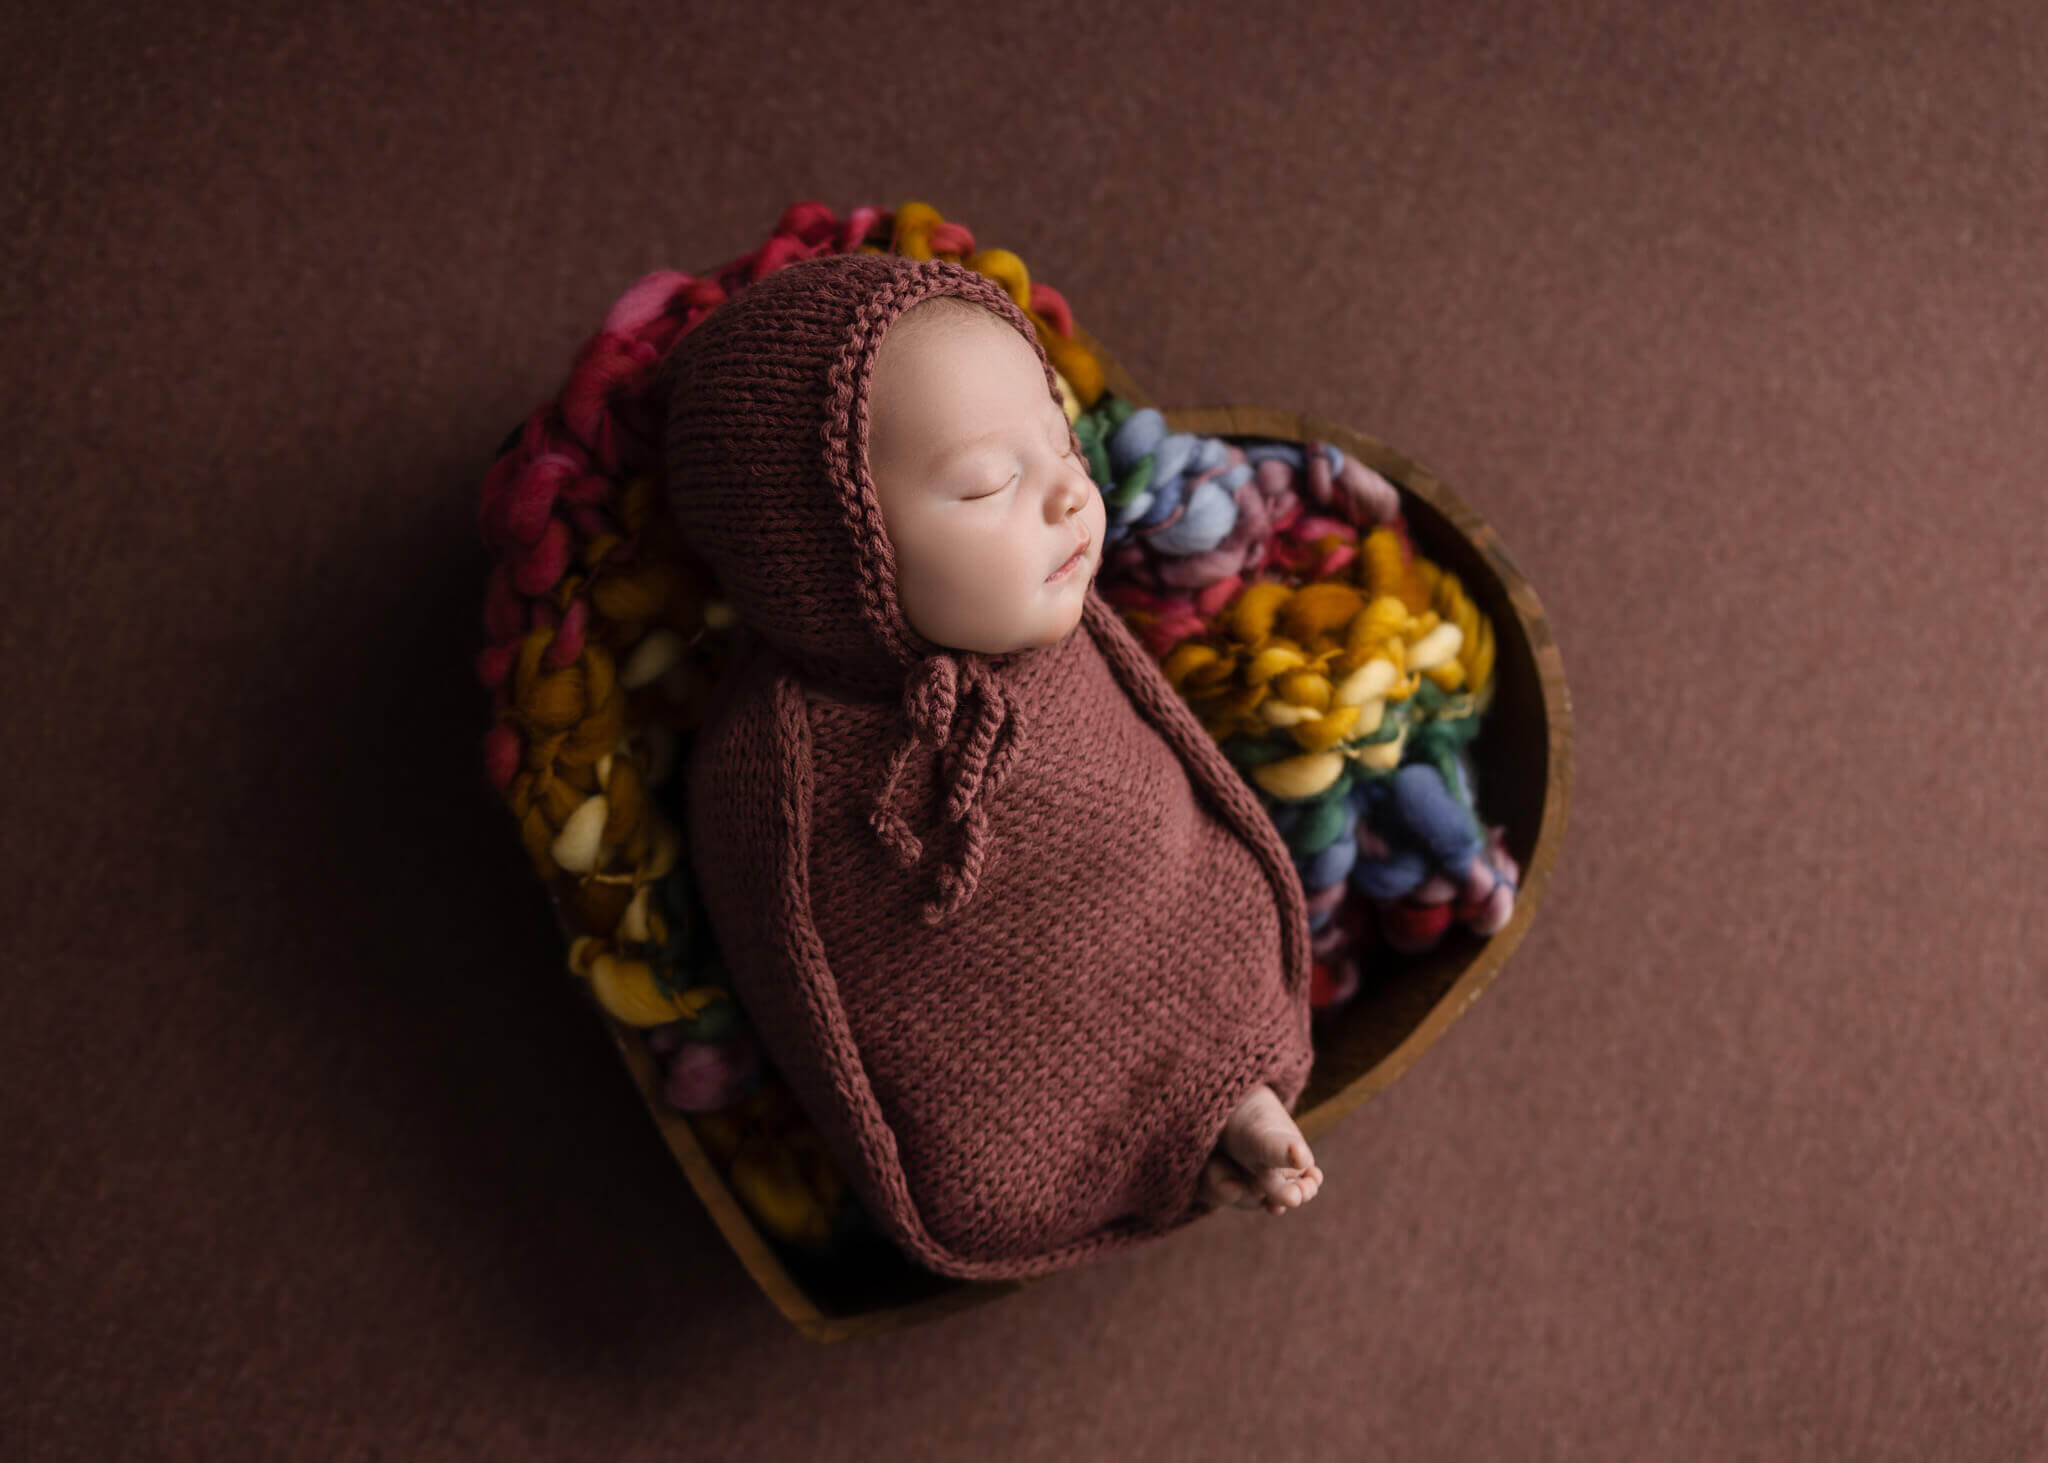 newborn baby asleep on a rainbow blanket in a heart shaped bowl set wrapped in a pink blanket and wearing a pink bonnet